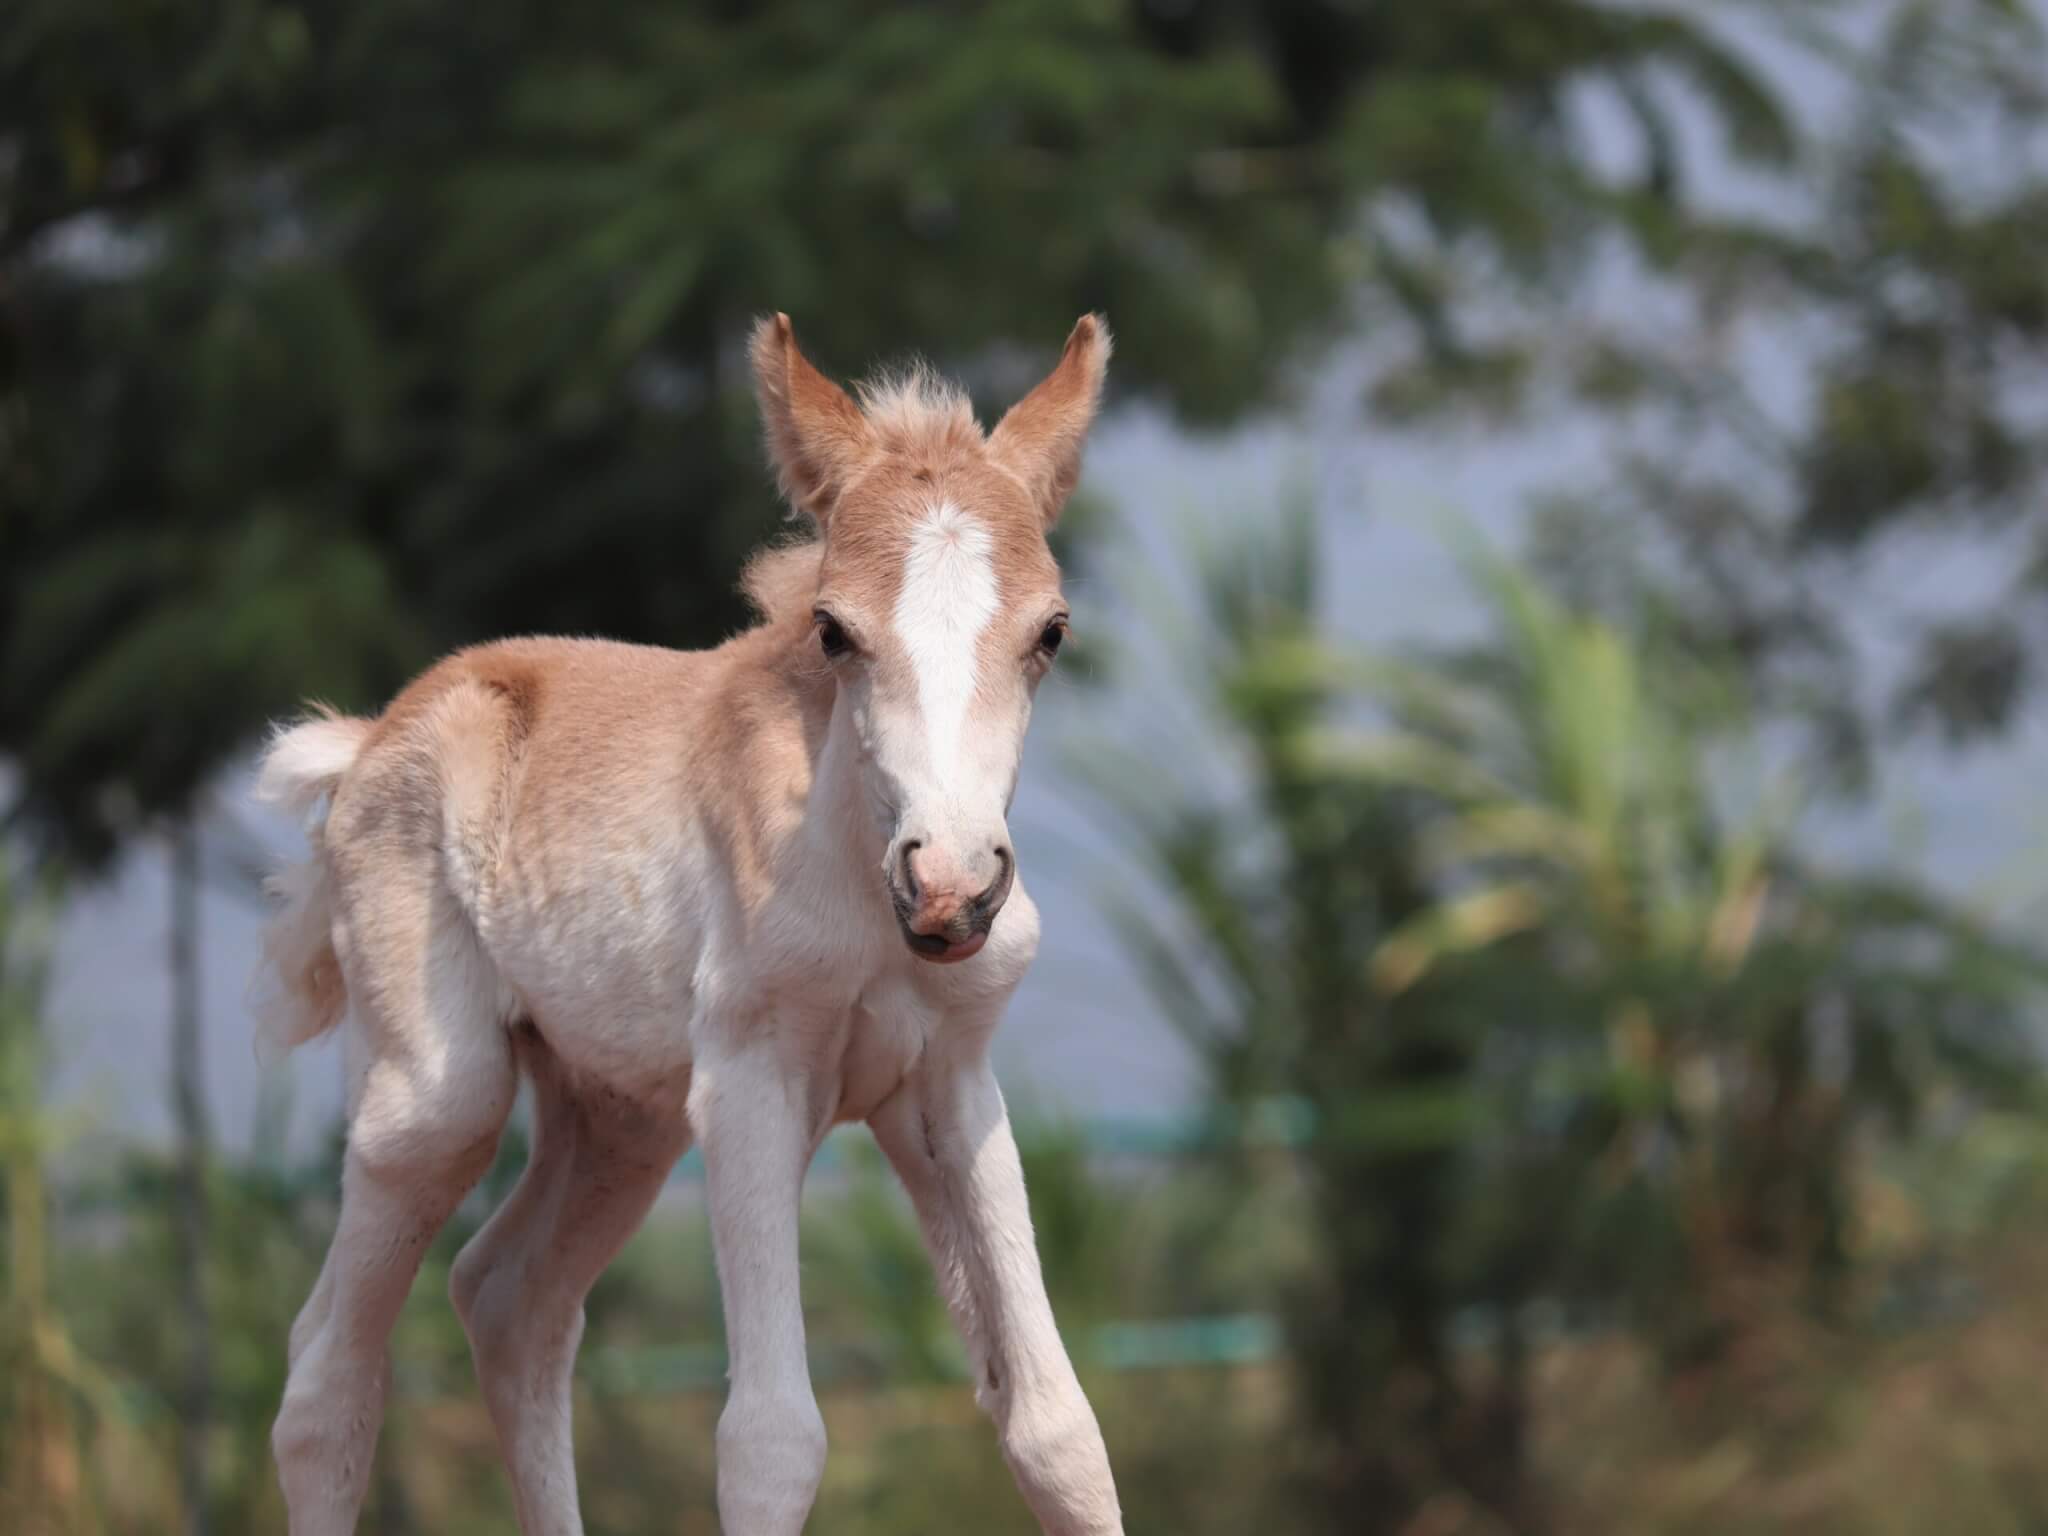 Rudi the foal is the newest resident of Animal Rahat's sanctuary.